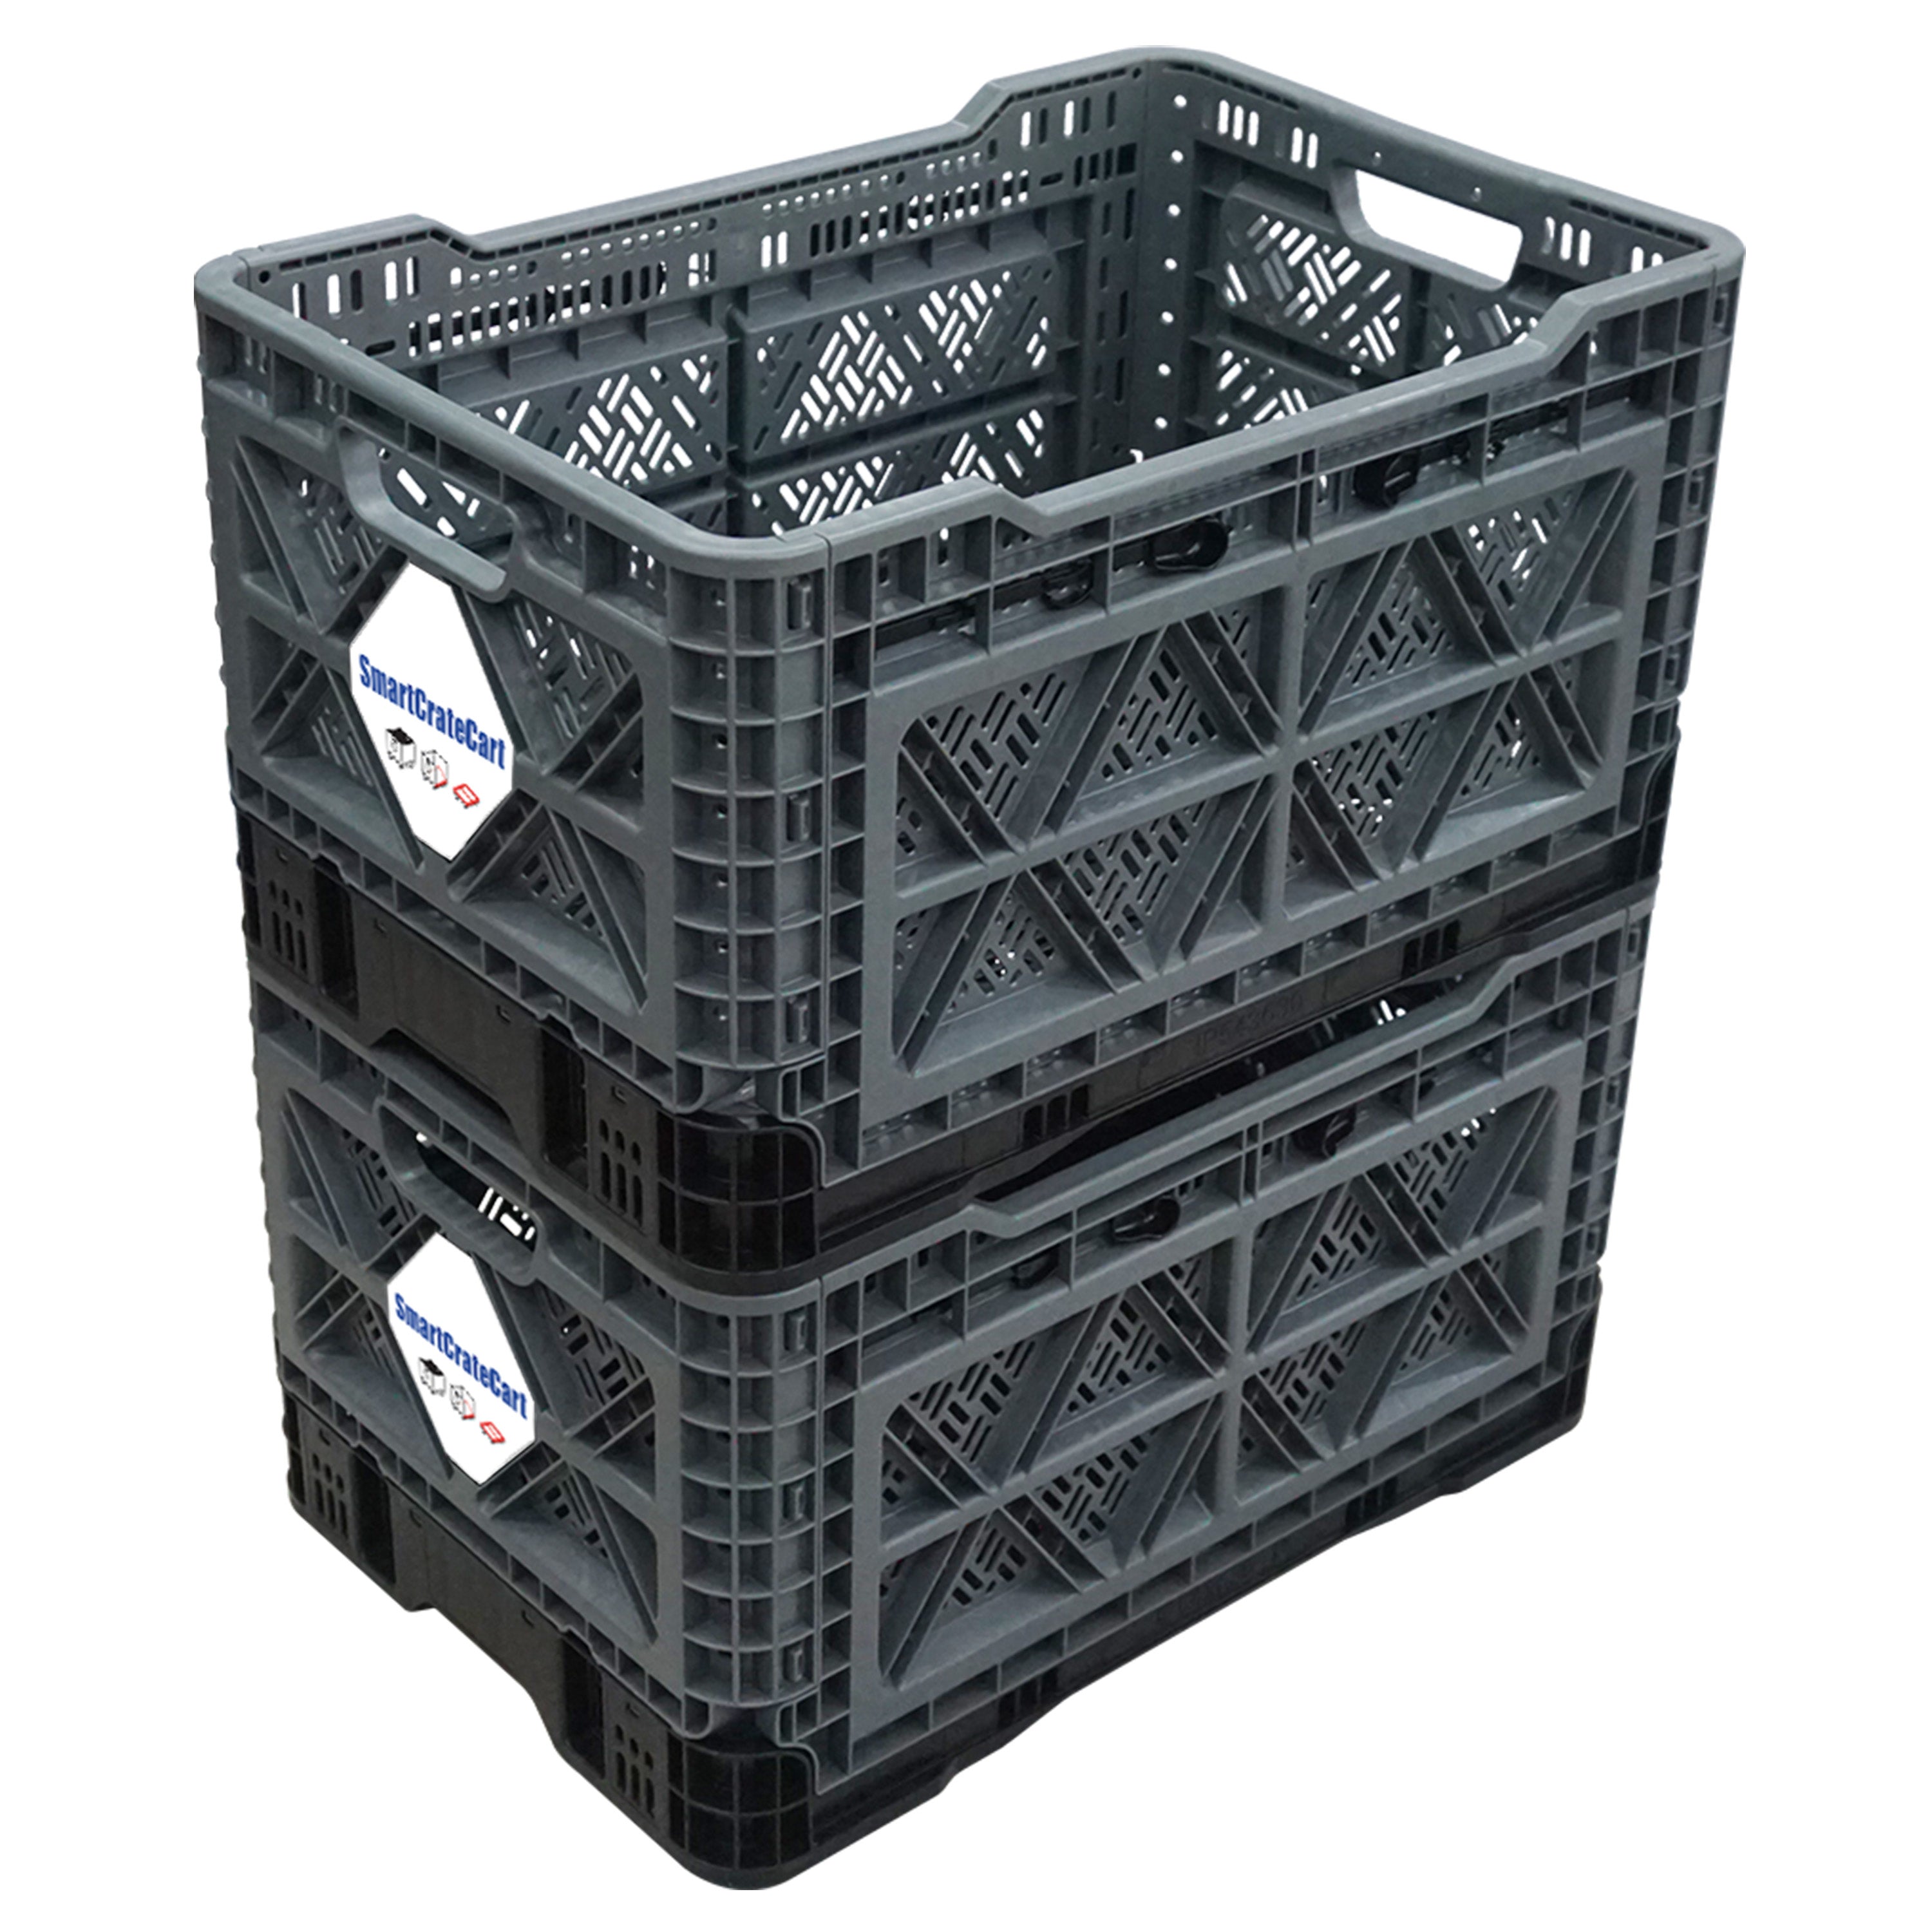 SmartCrateCart 59 Liter (15.6 Gallon) All-Purpose Collapsible and Stackable Storage Crate